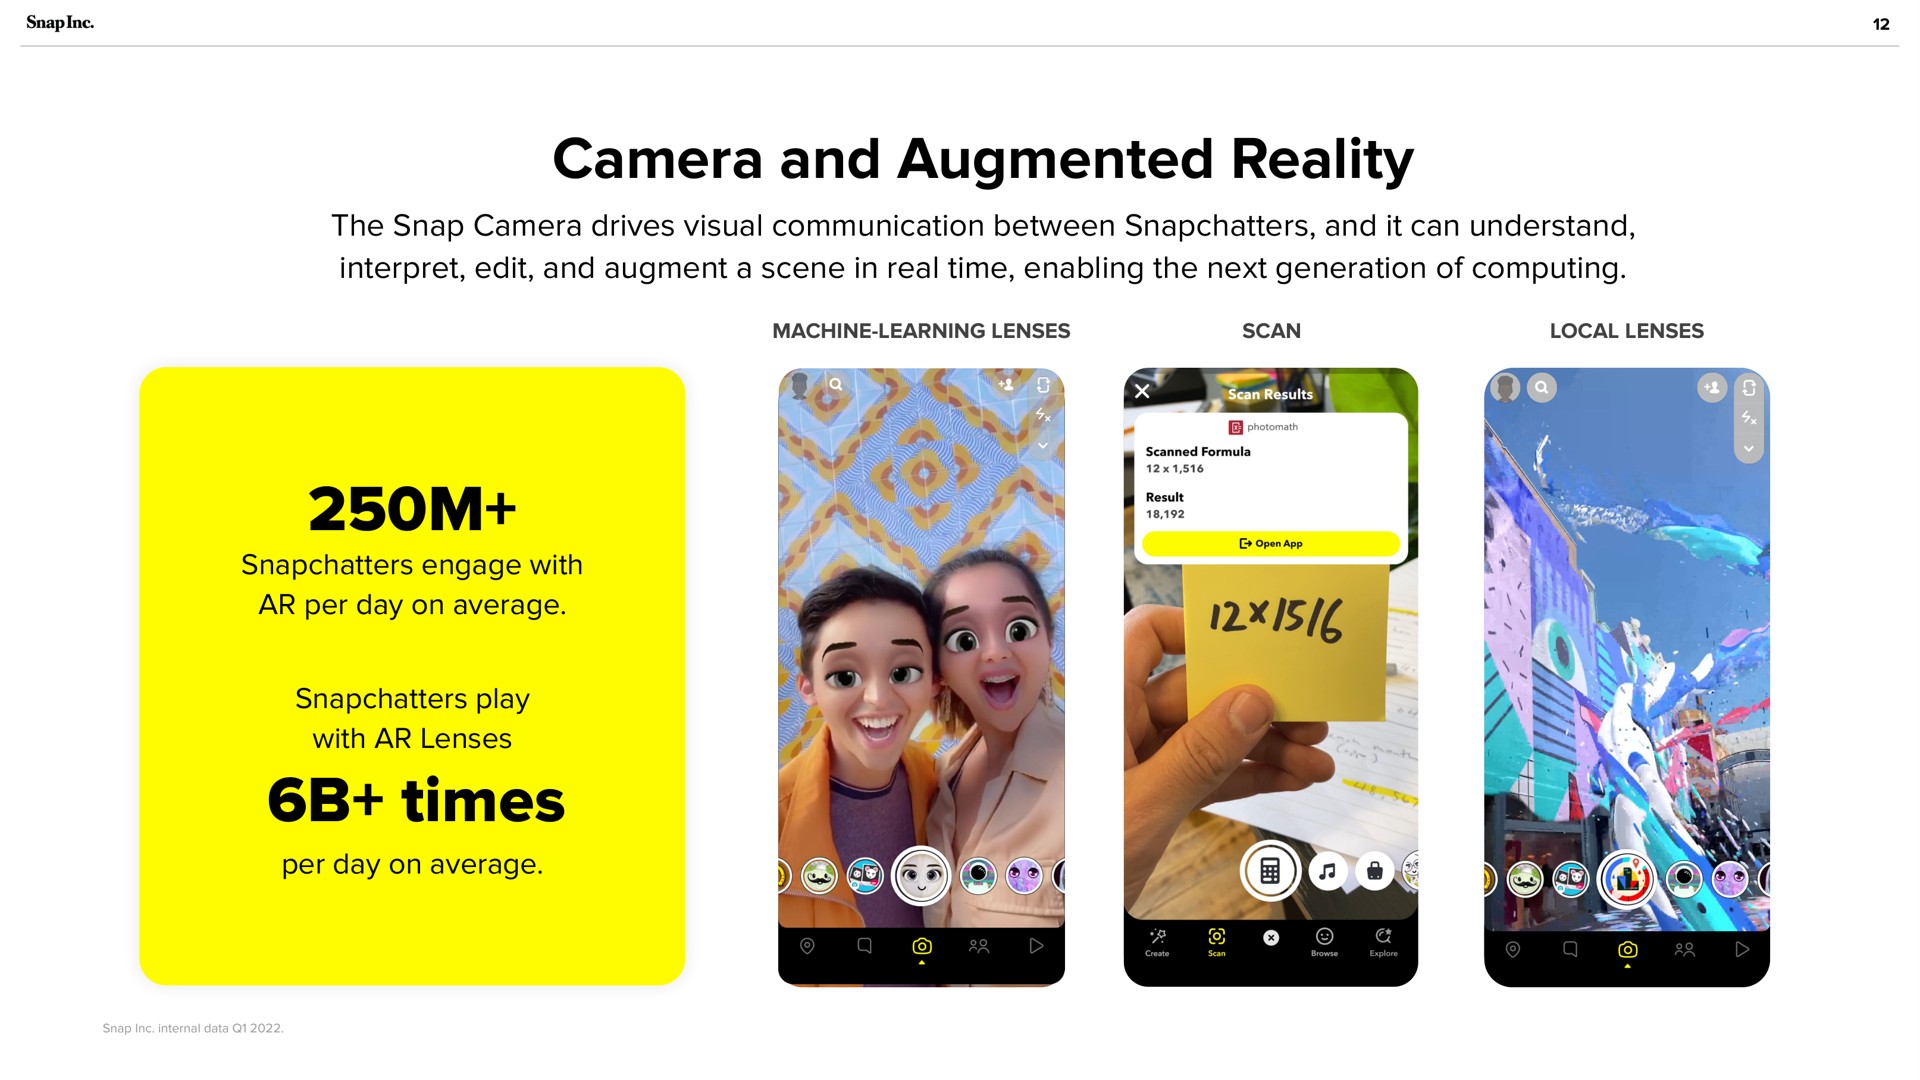 camera and augmented reality times | Snap Inc